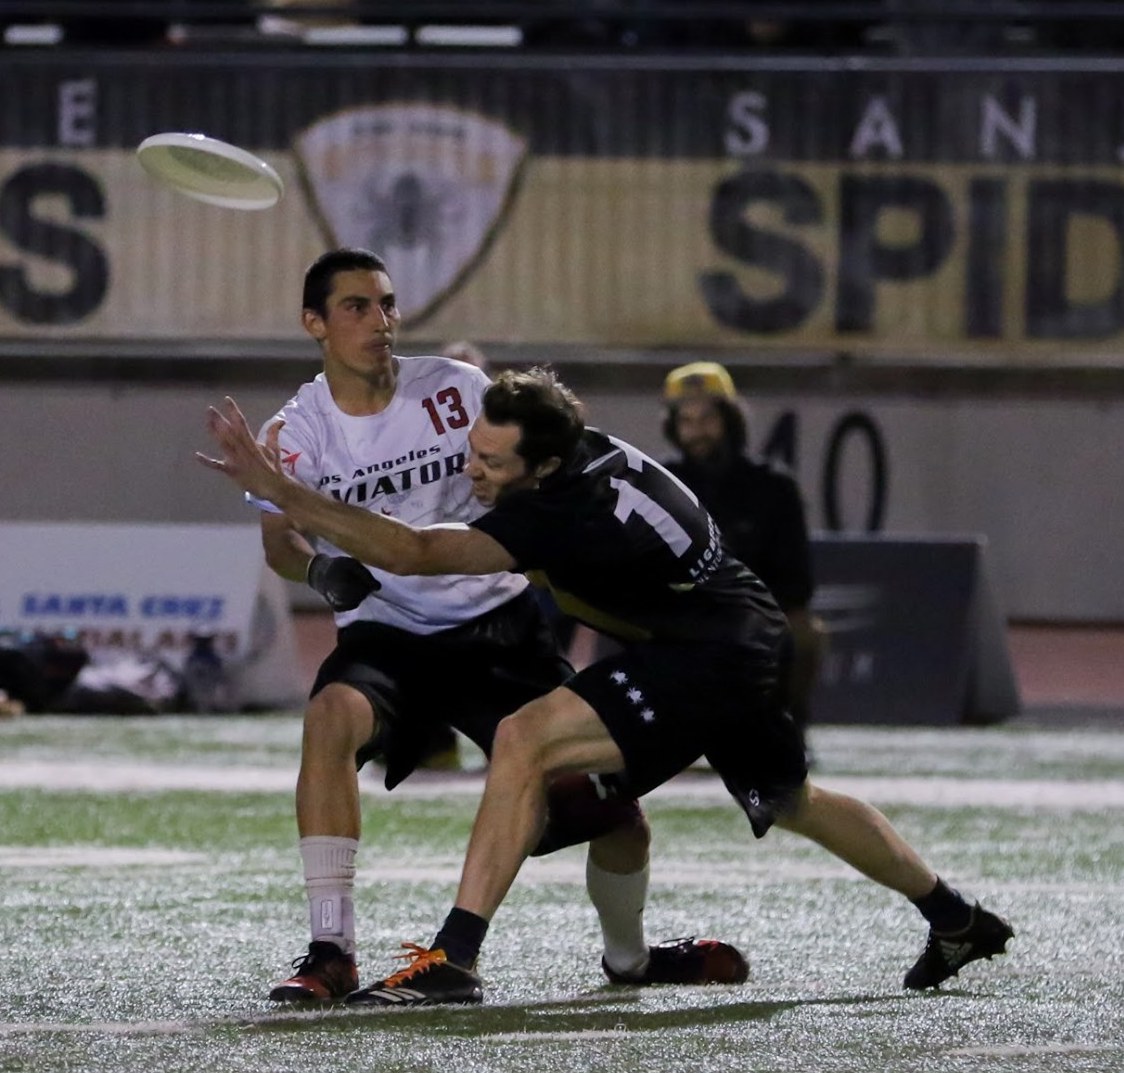 Kyle throwing a forehand for a score against  the San Jose Spiders.  PC: Meg Hofner